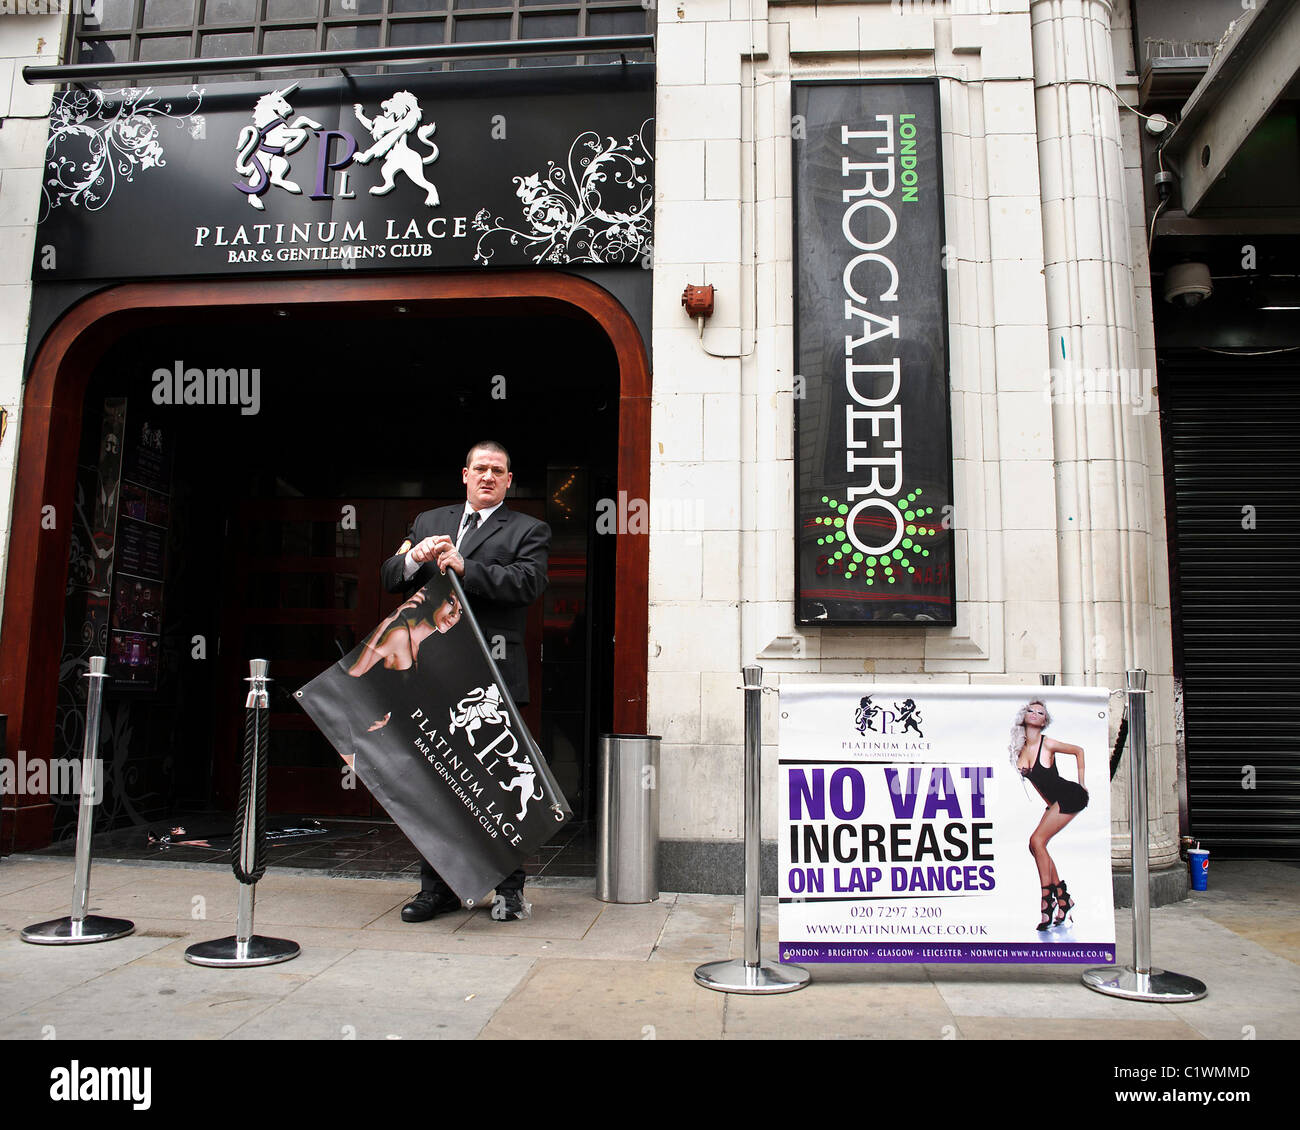 26/03/2011. A man puts sign out advertising a Lap Dancing club in Coventry Street, London. Stock Photo